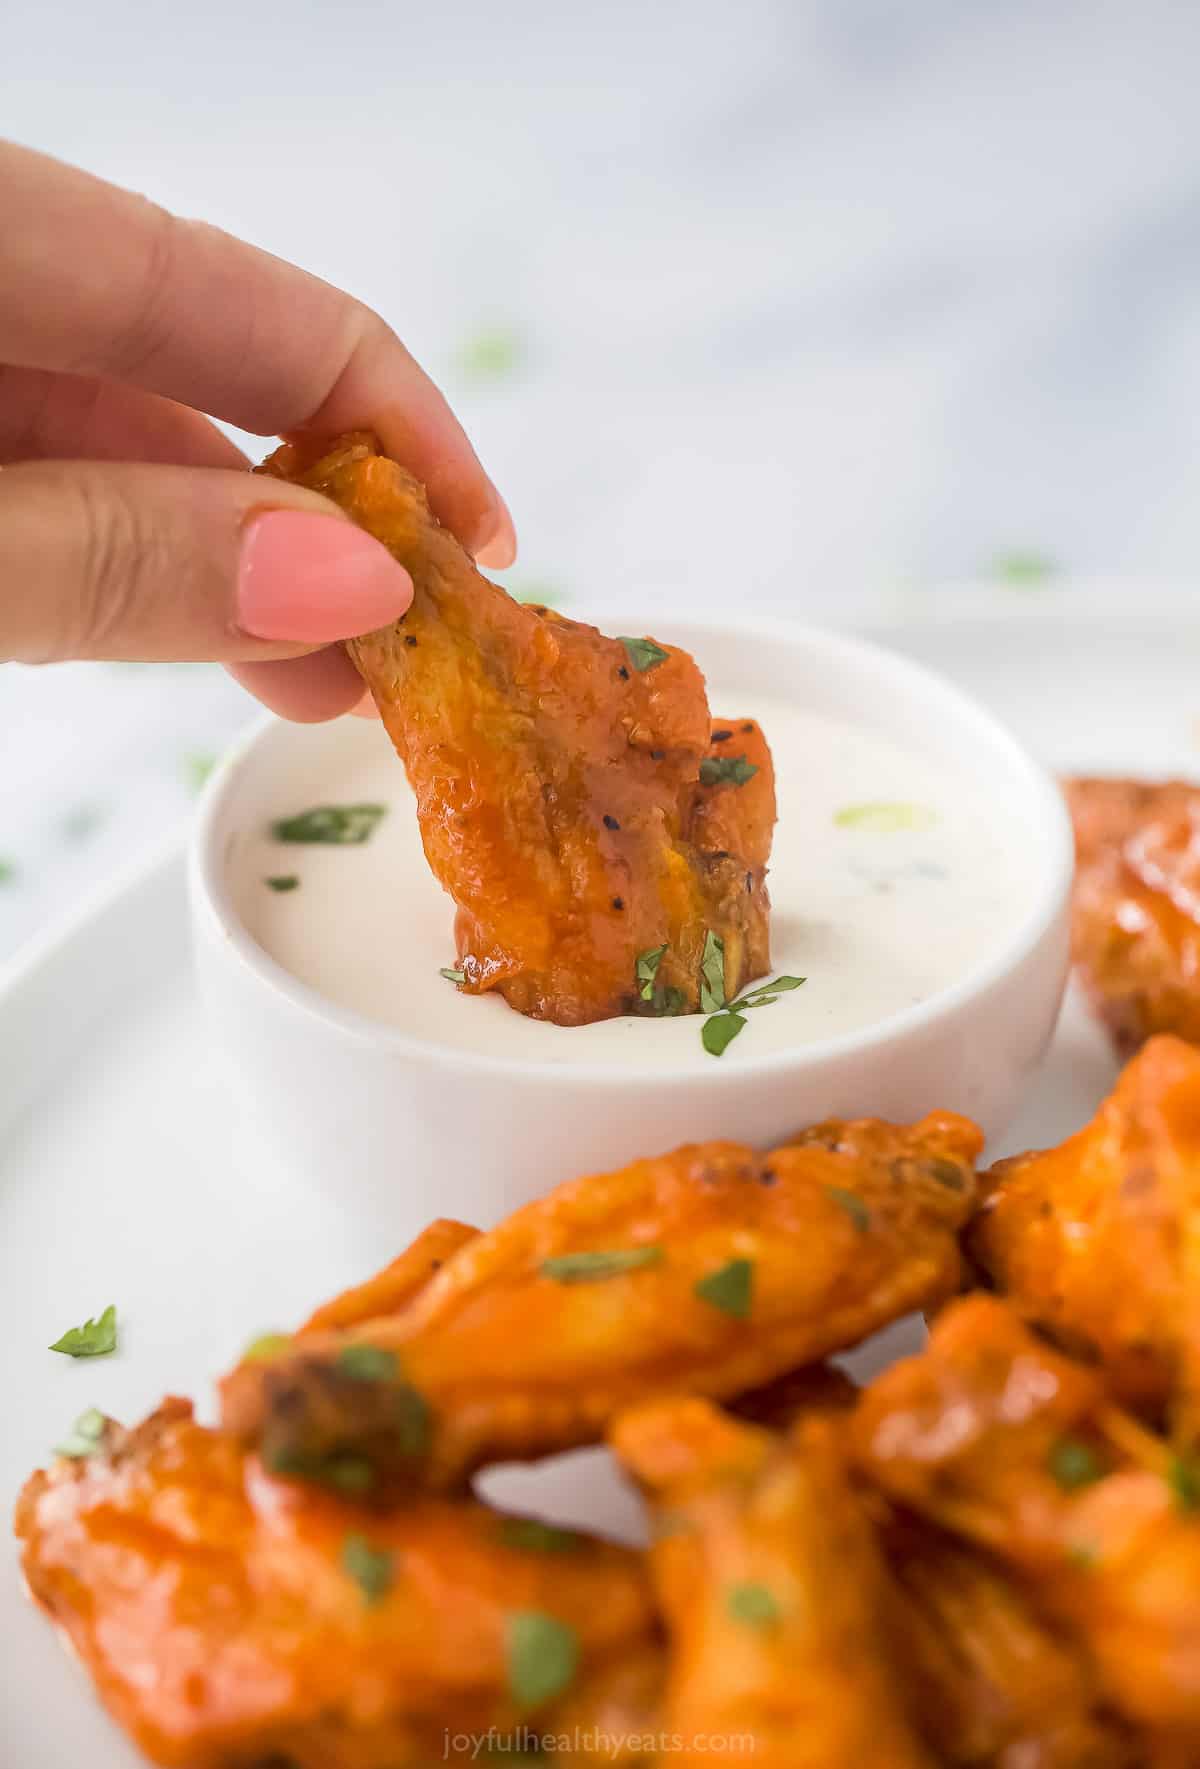 A hand dipping a chicken wing into a small bowl of ranch dressing